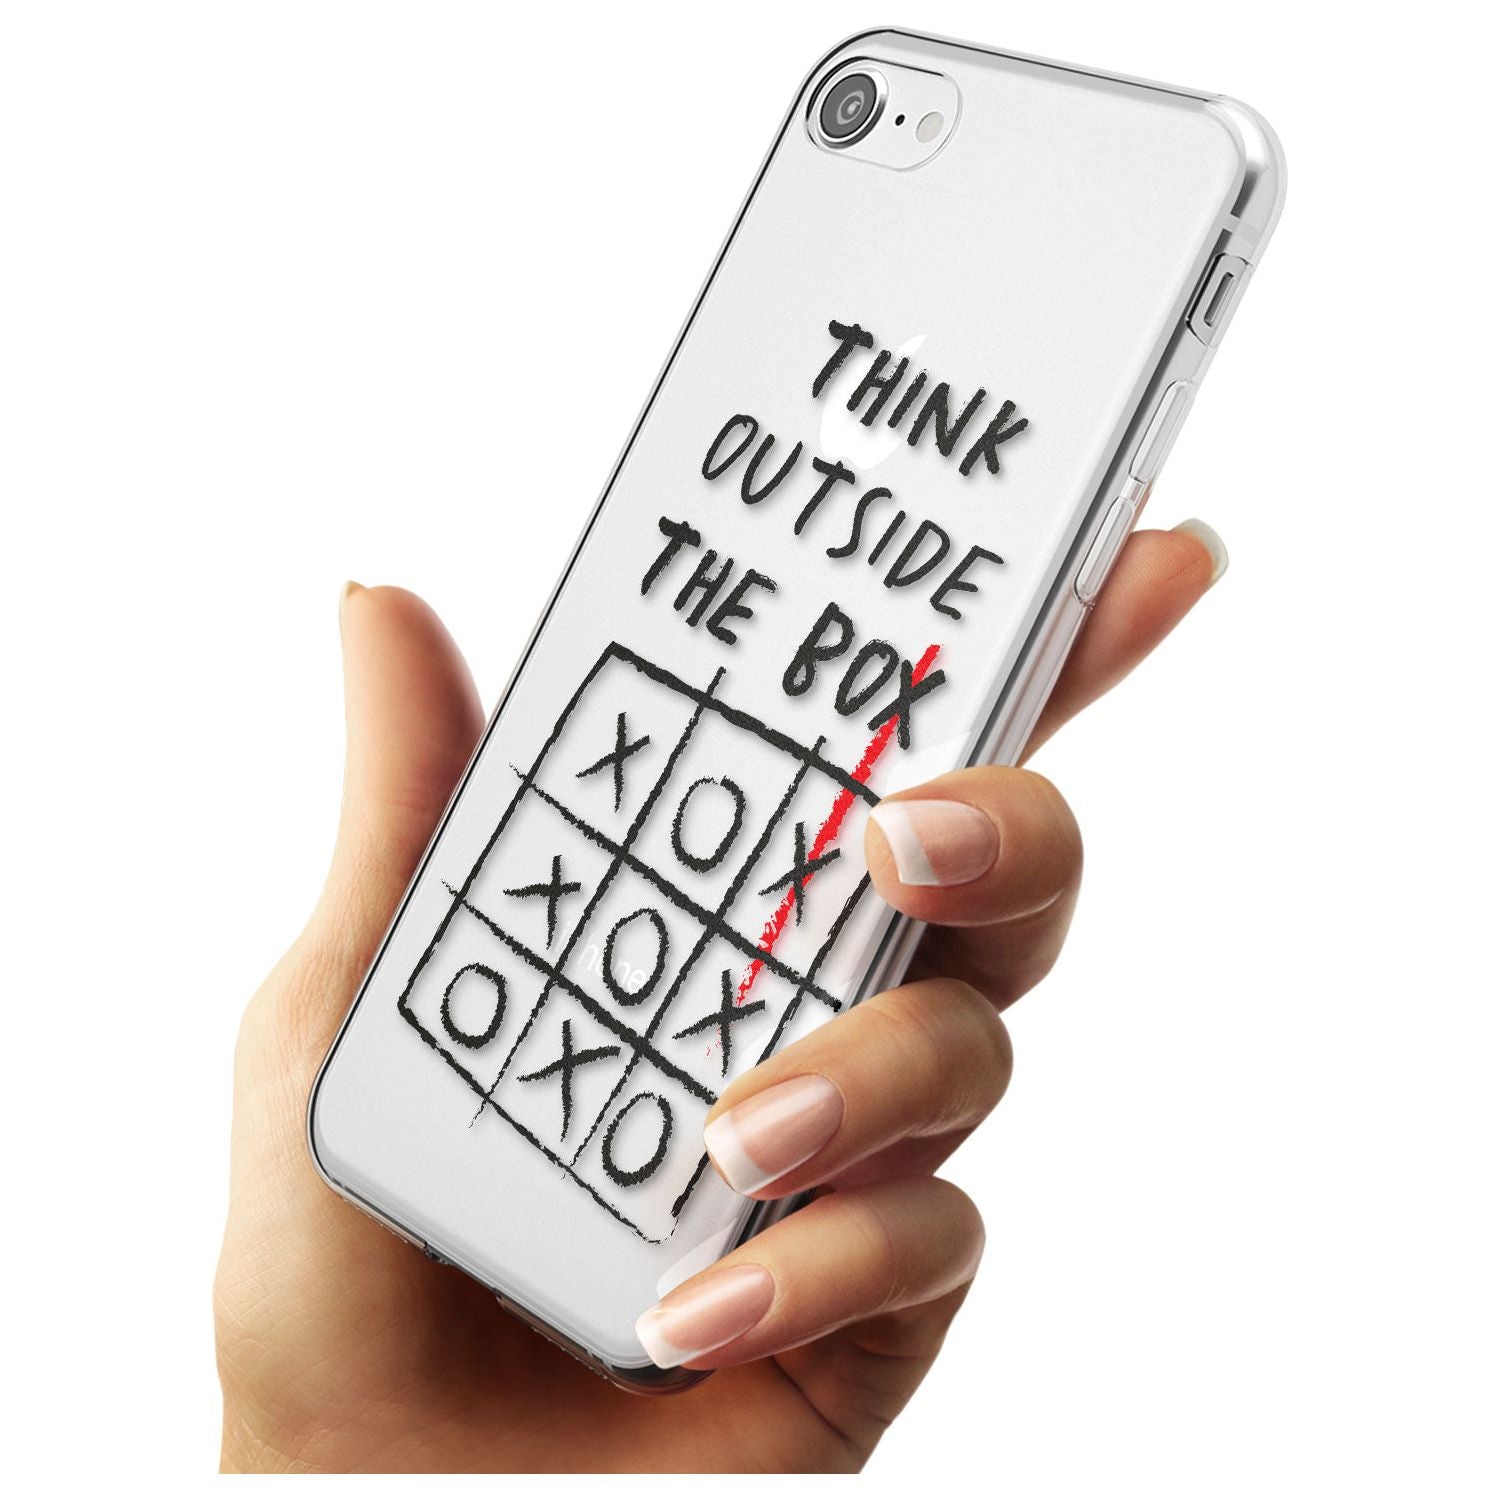 "Think Outside the Box" Slim TPU Phone Case for iPhone SE 8 7 Plus